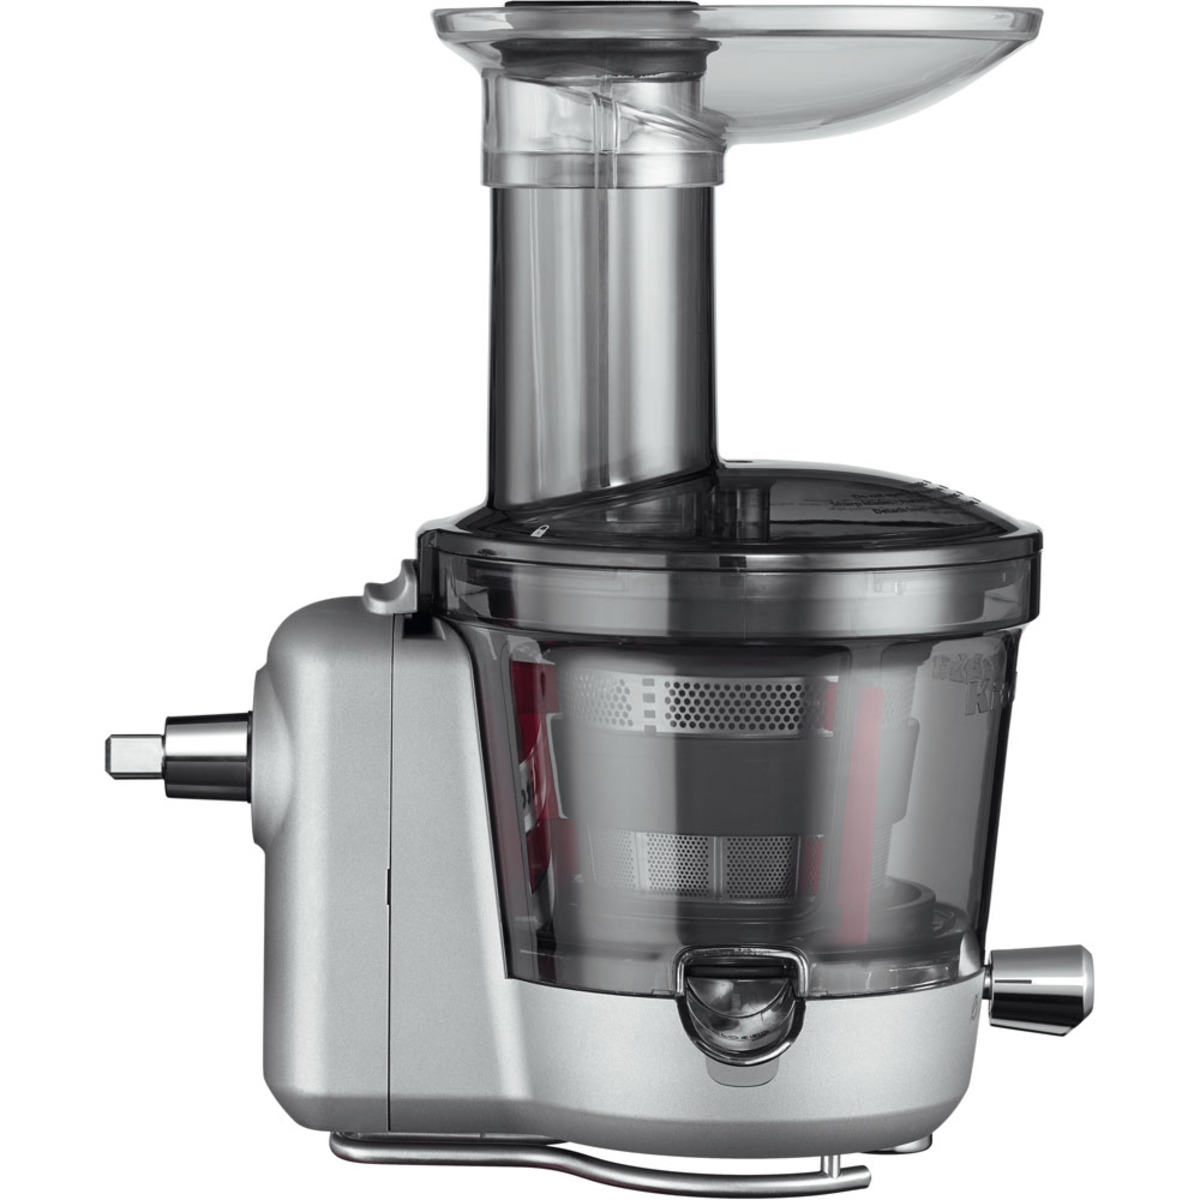 https://prcdirect.co.uk/media/catalog/product/M/a/Maximum_Extraction_Slow_Juicer_Sauce_Attachment_45.jpg